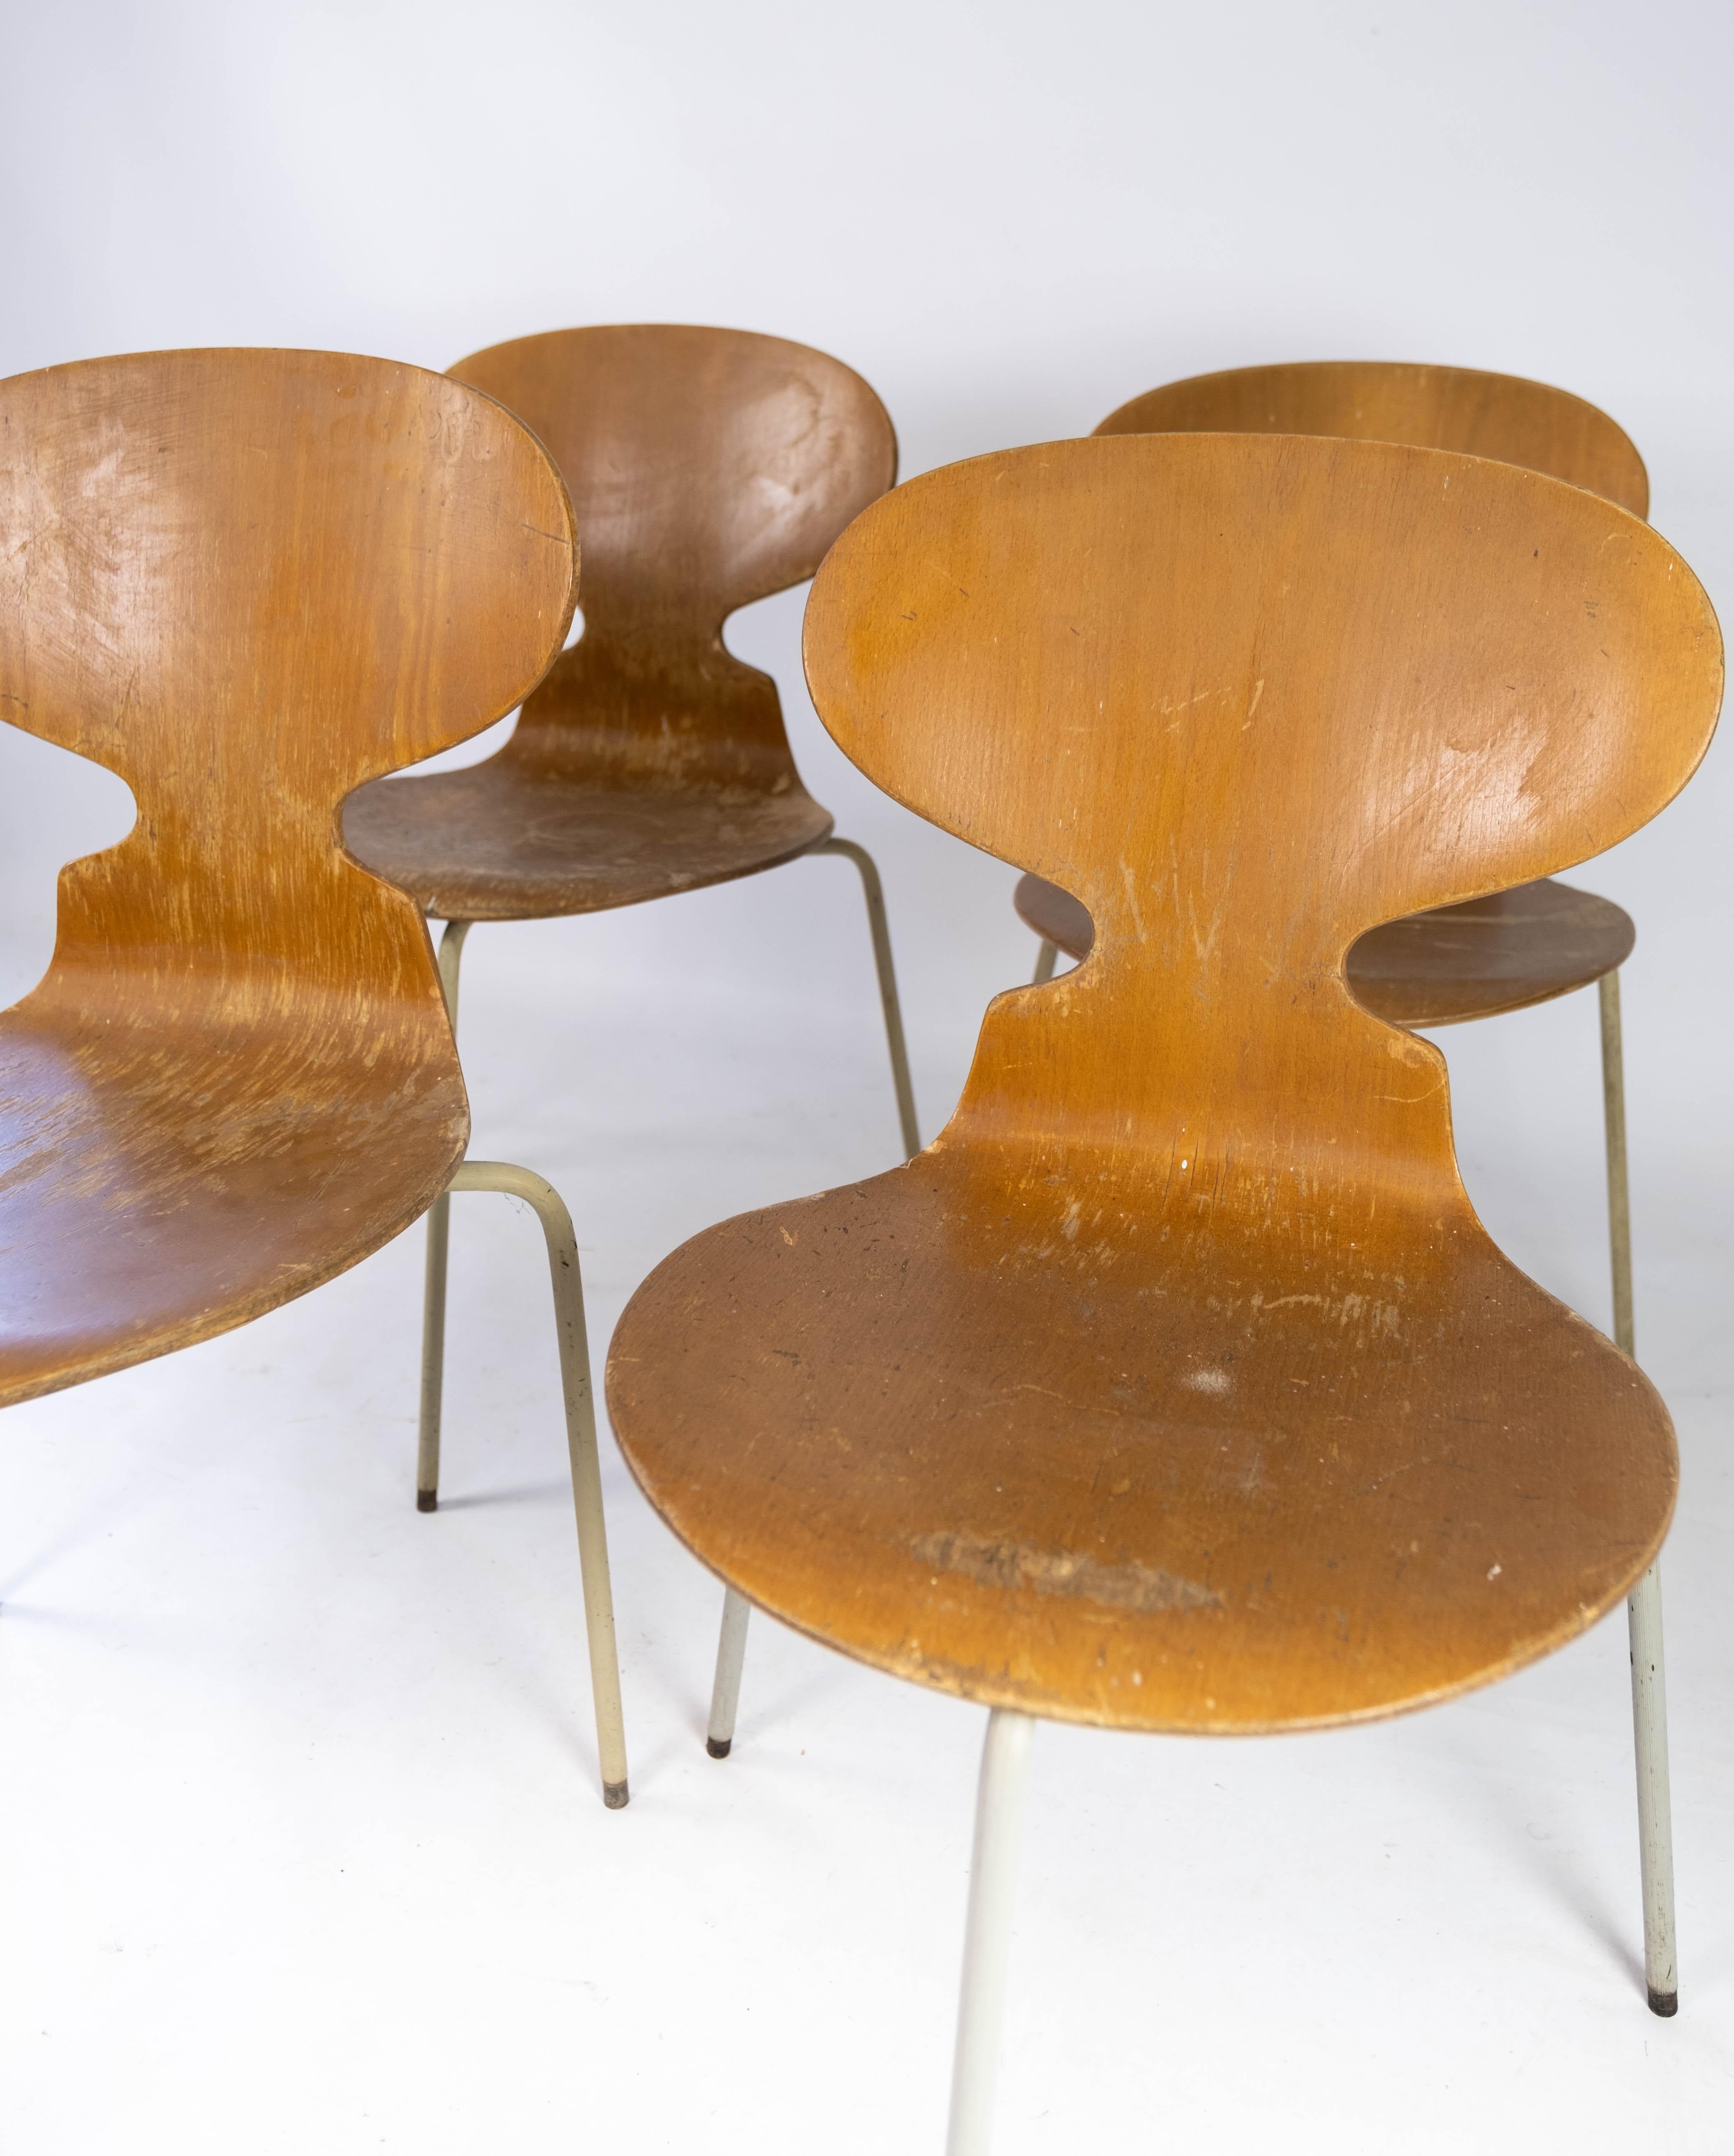 Scandinavian Modern Set of Four Ant Chairs, Model 3101, in Light Wood, by Arne Jacobsen, 1950s For Sale